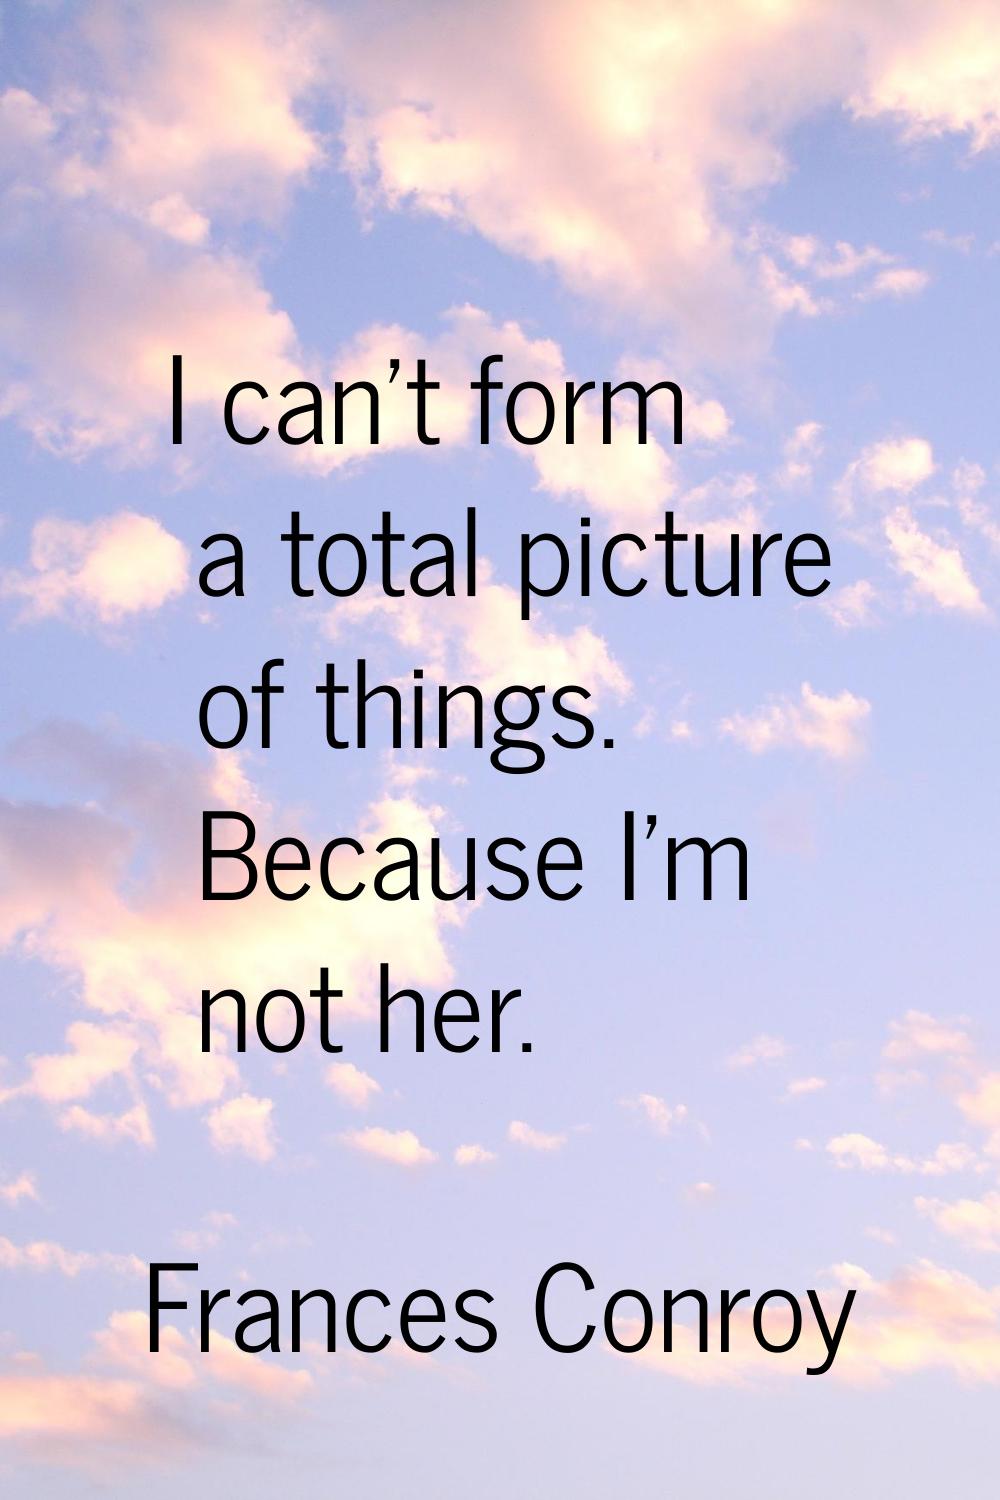 I can't form a total picture of things. Because I'm not her.